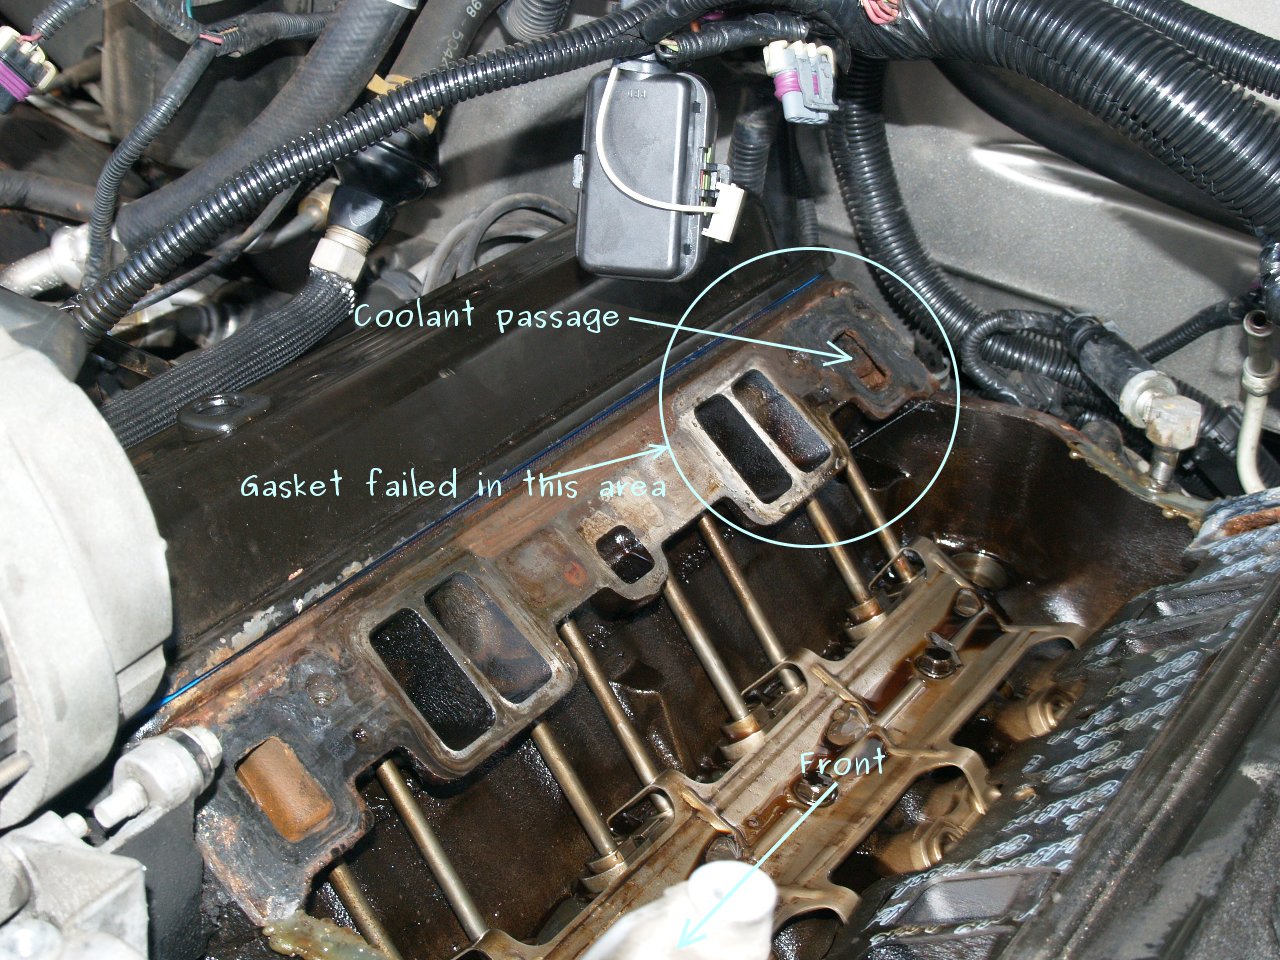 See P337C in engine